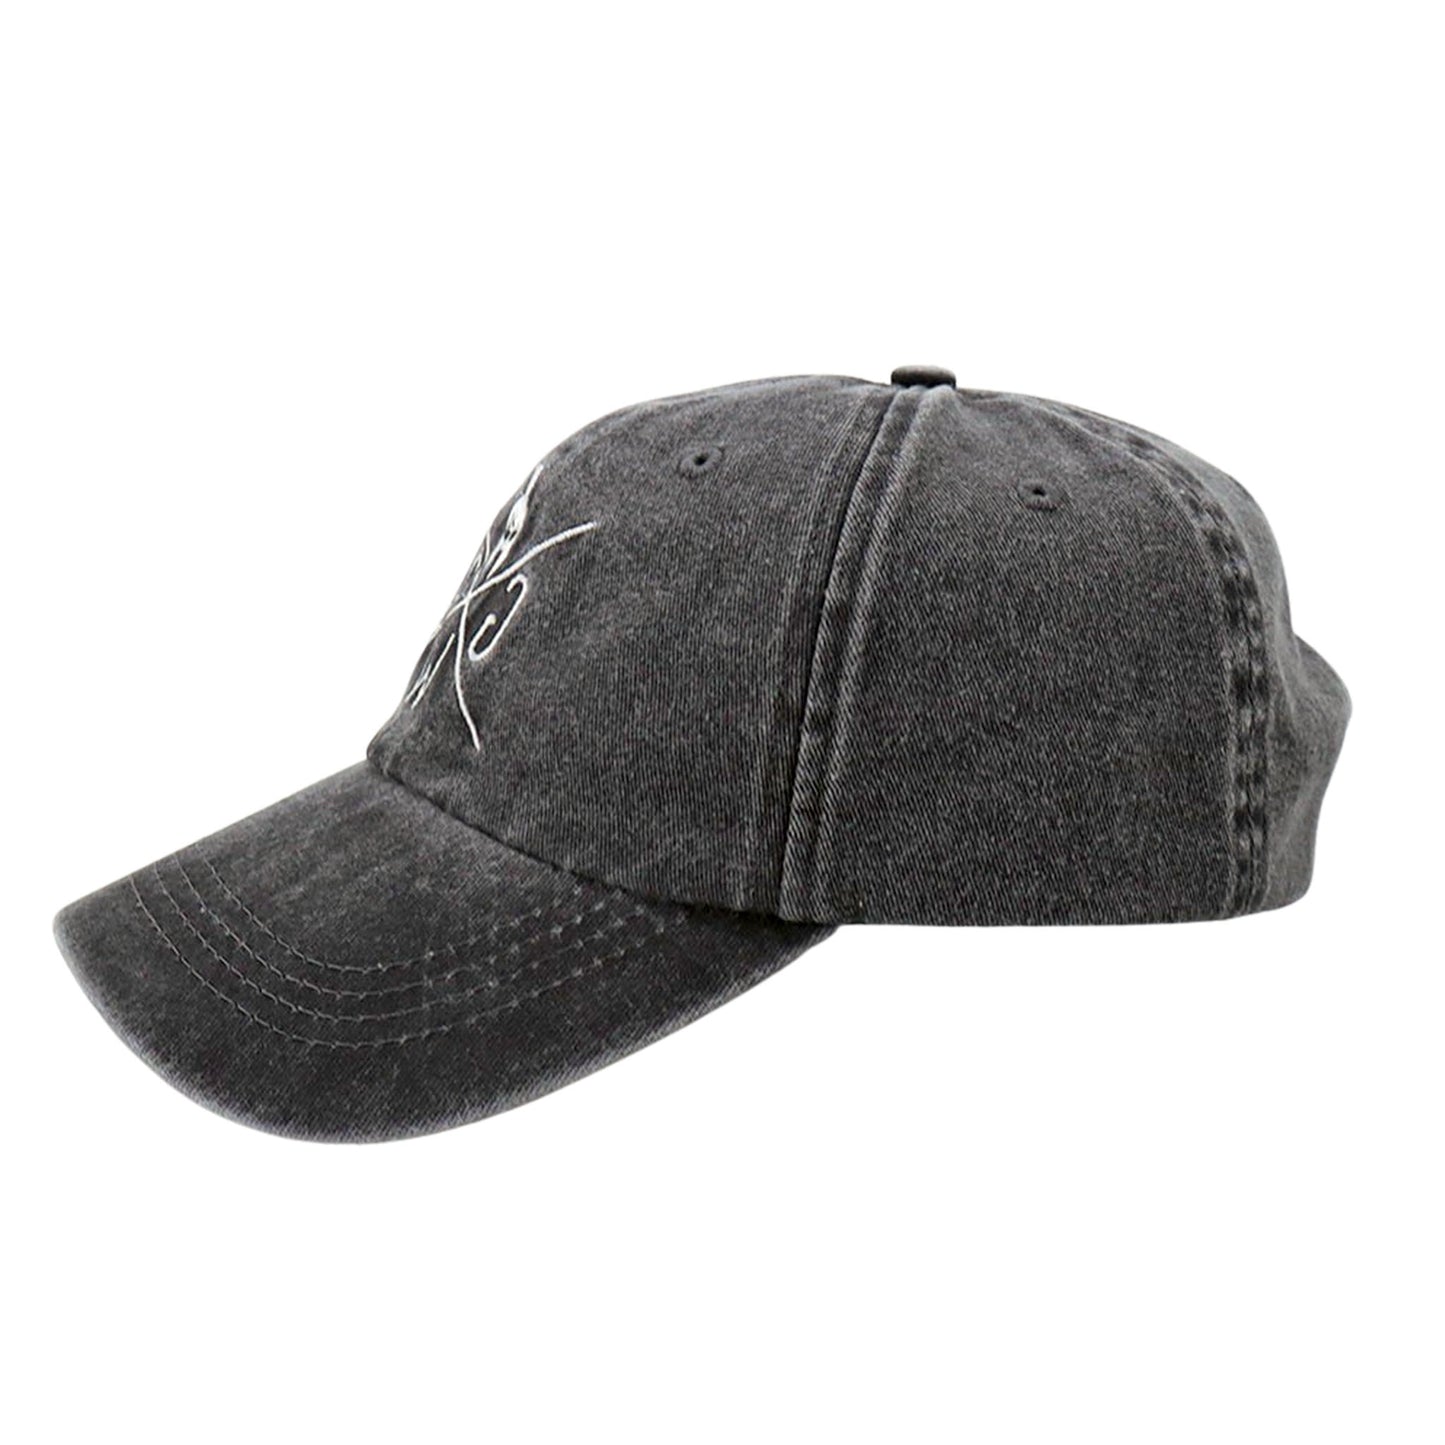 SoCal Outlaw Cap - Stonewashed Gray